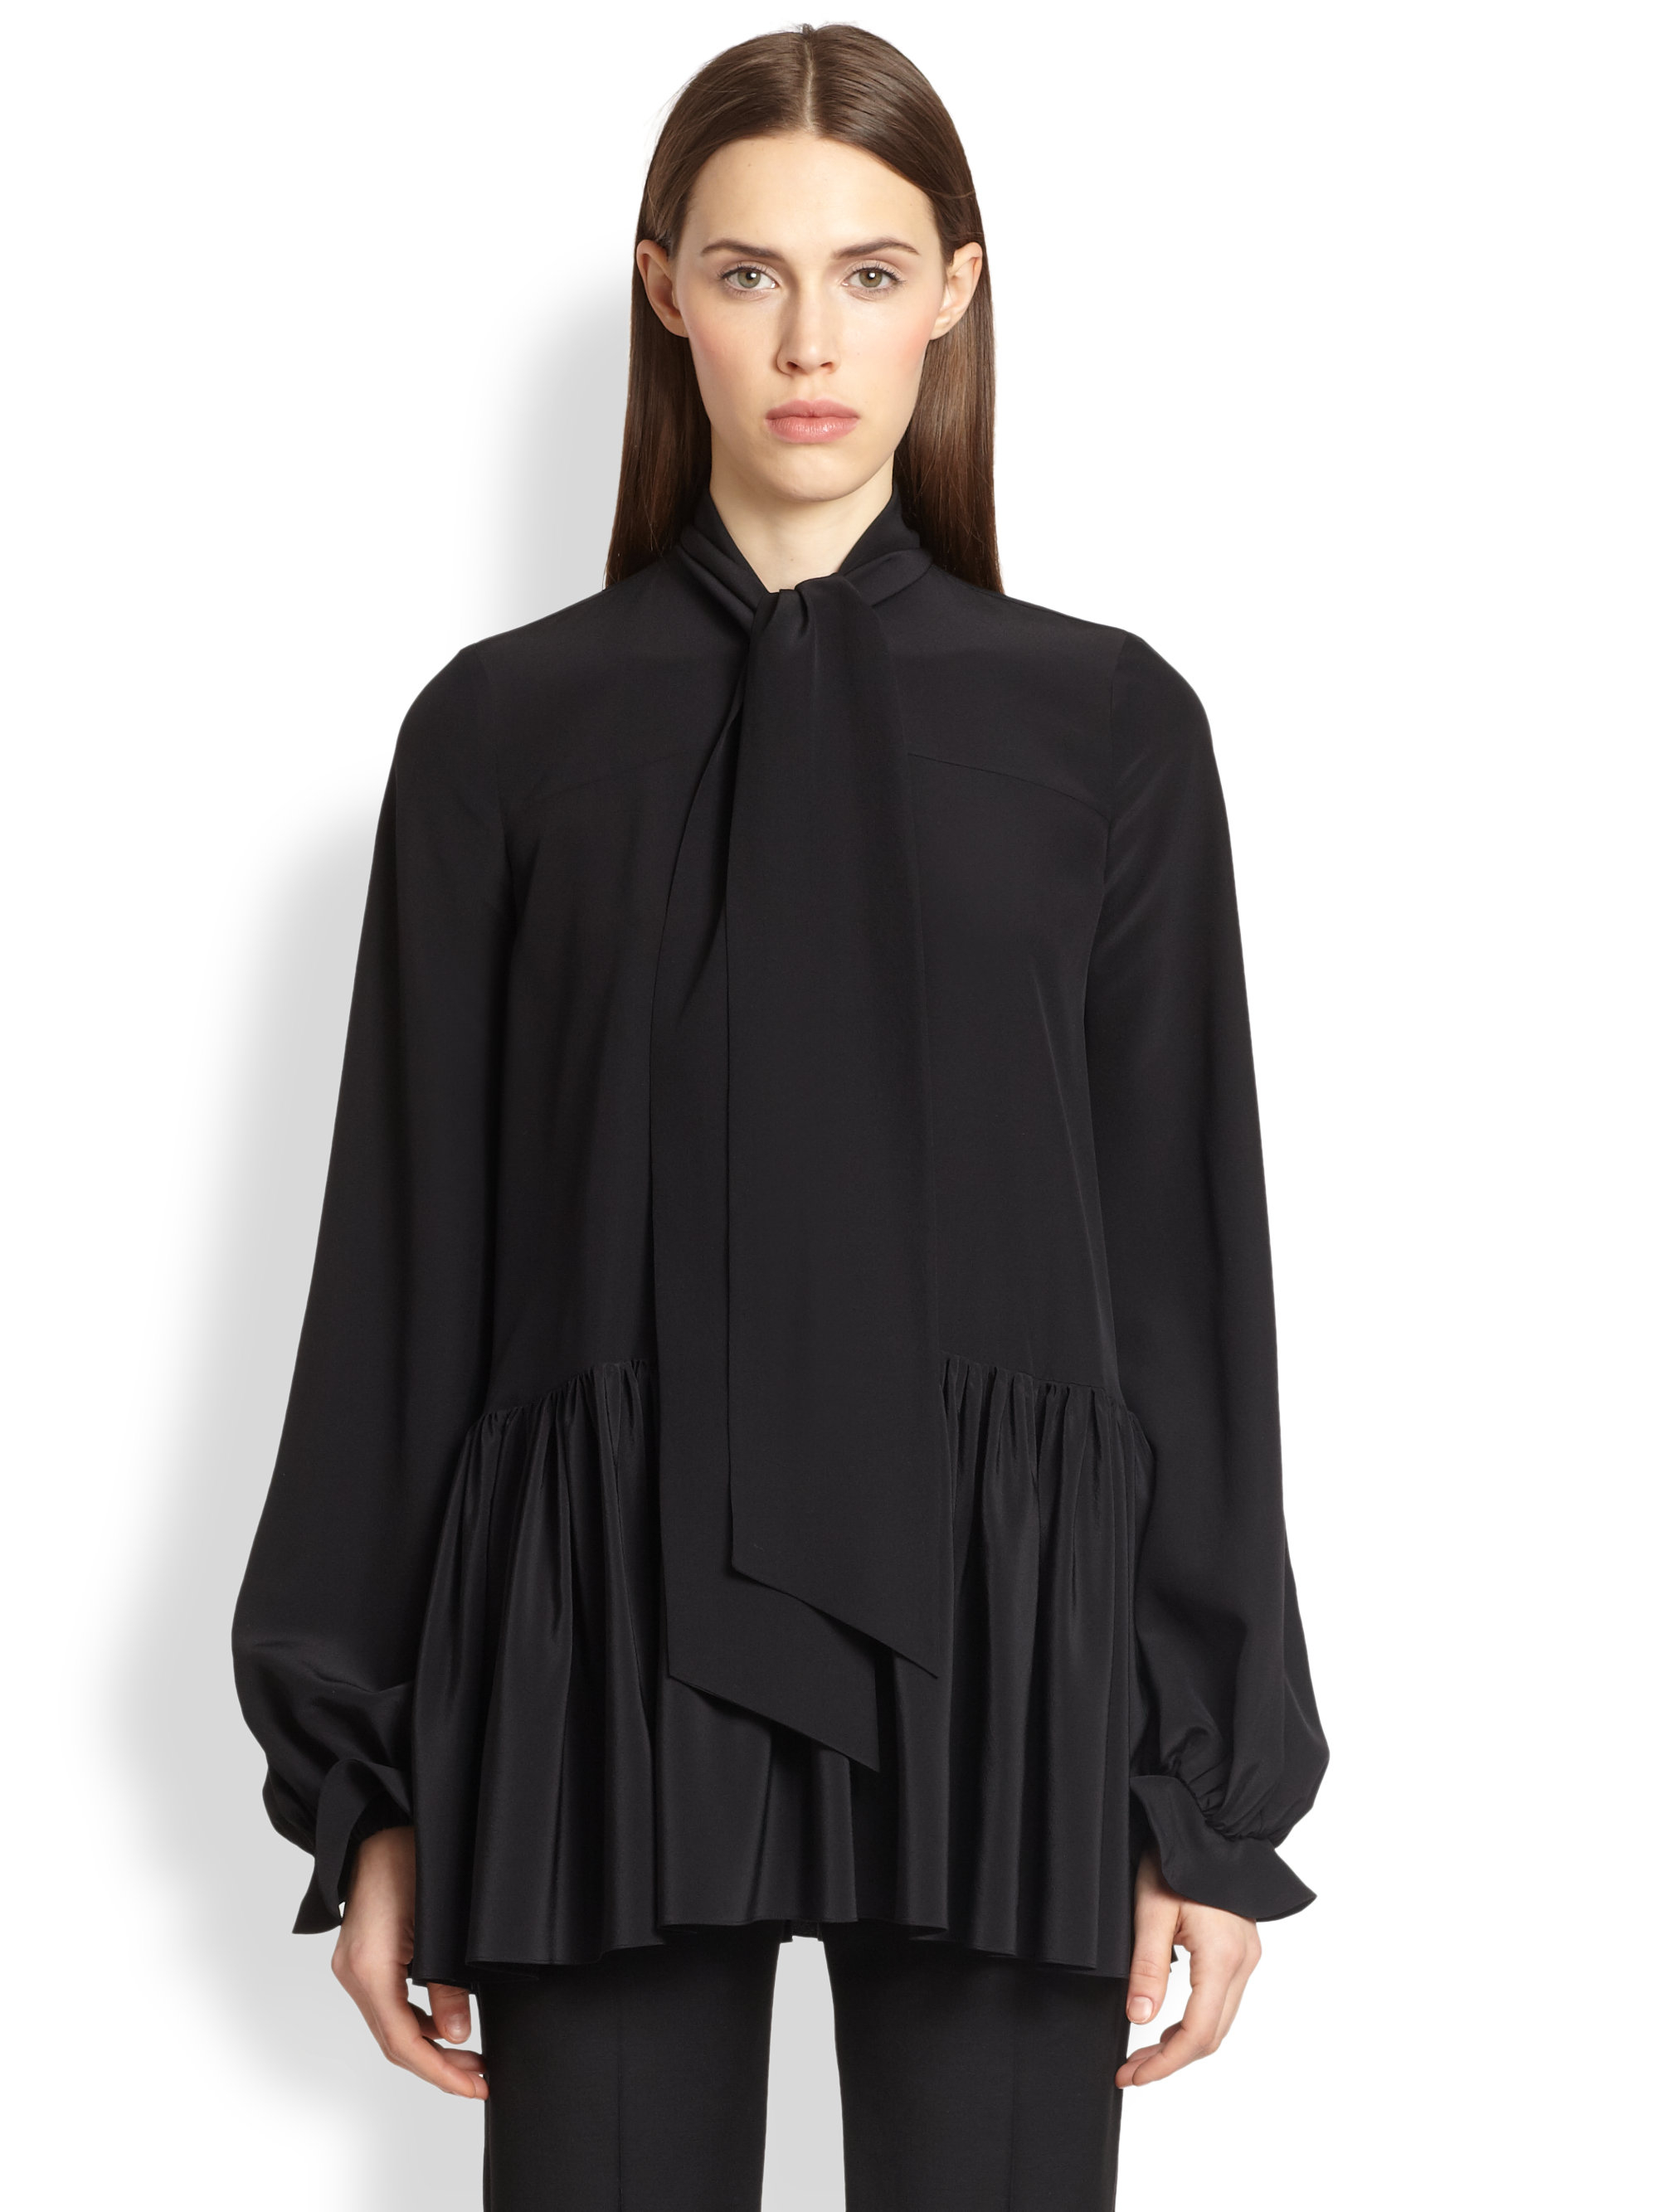 Lyst - Givenchy Silk Tie-Neck Blouse in Black